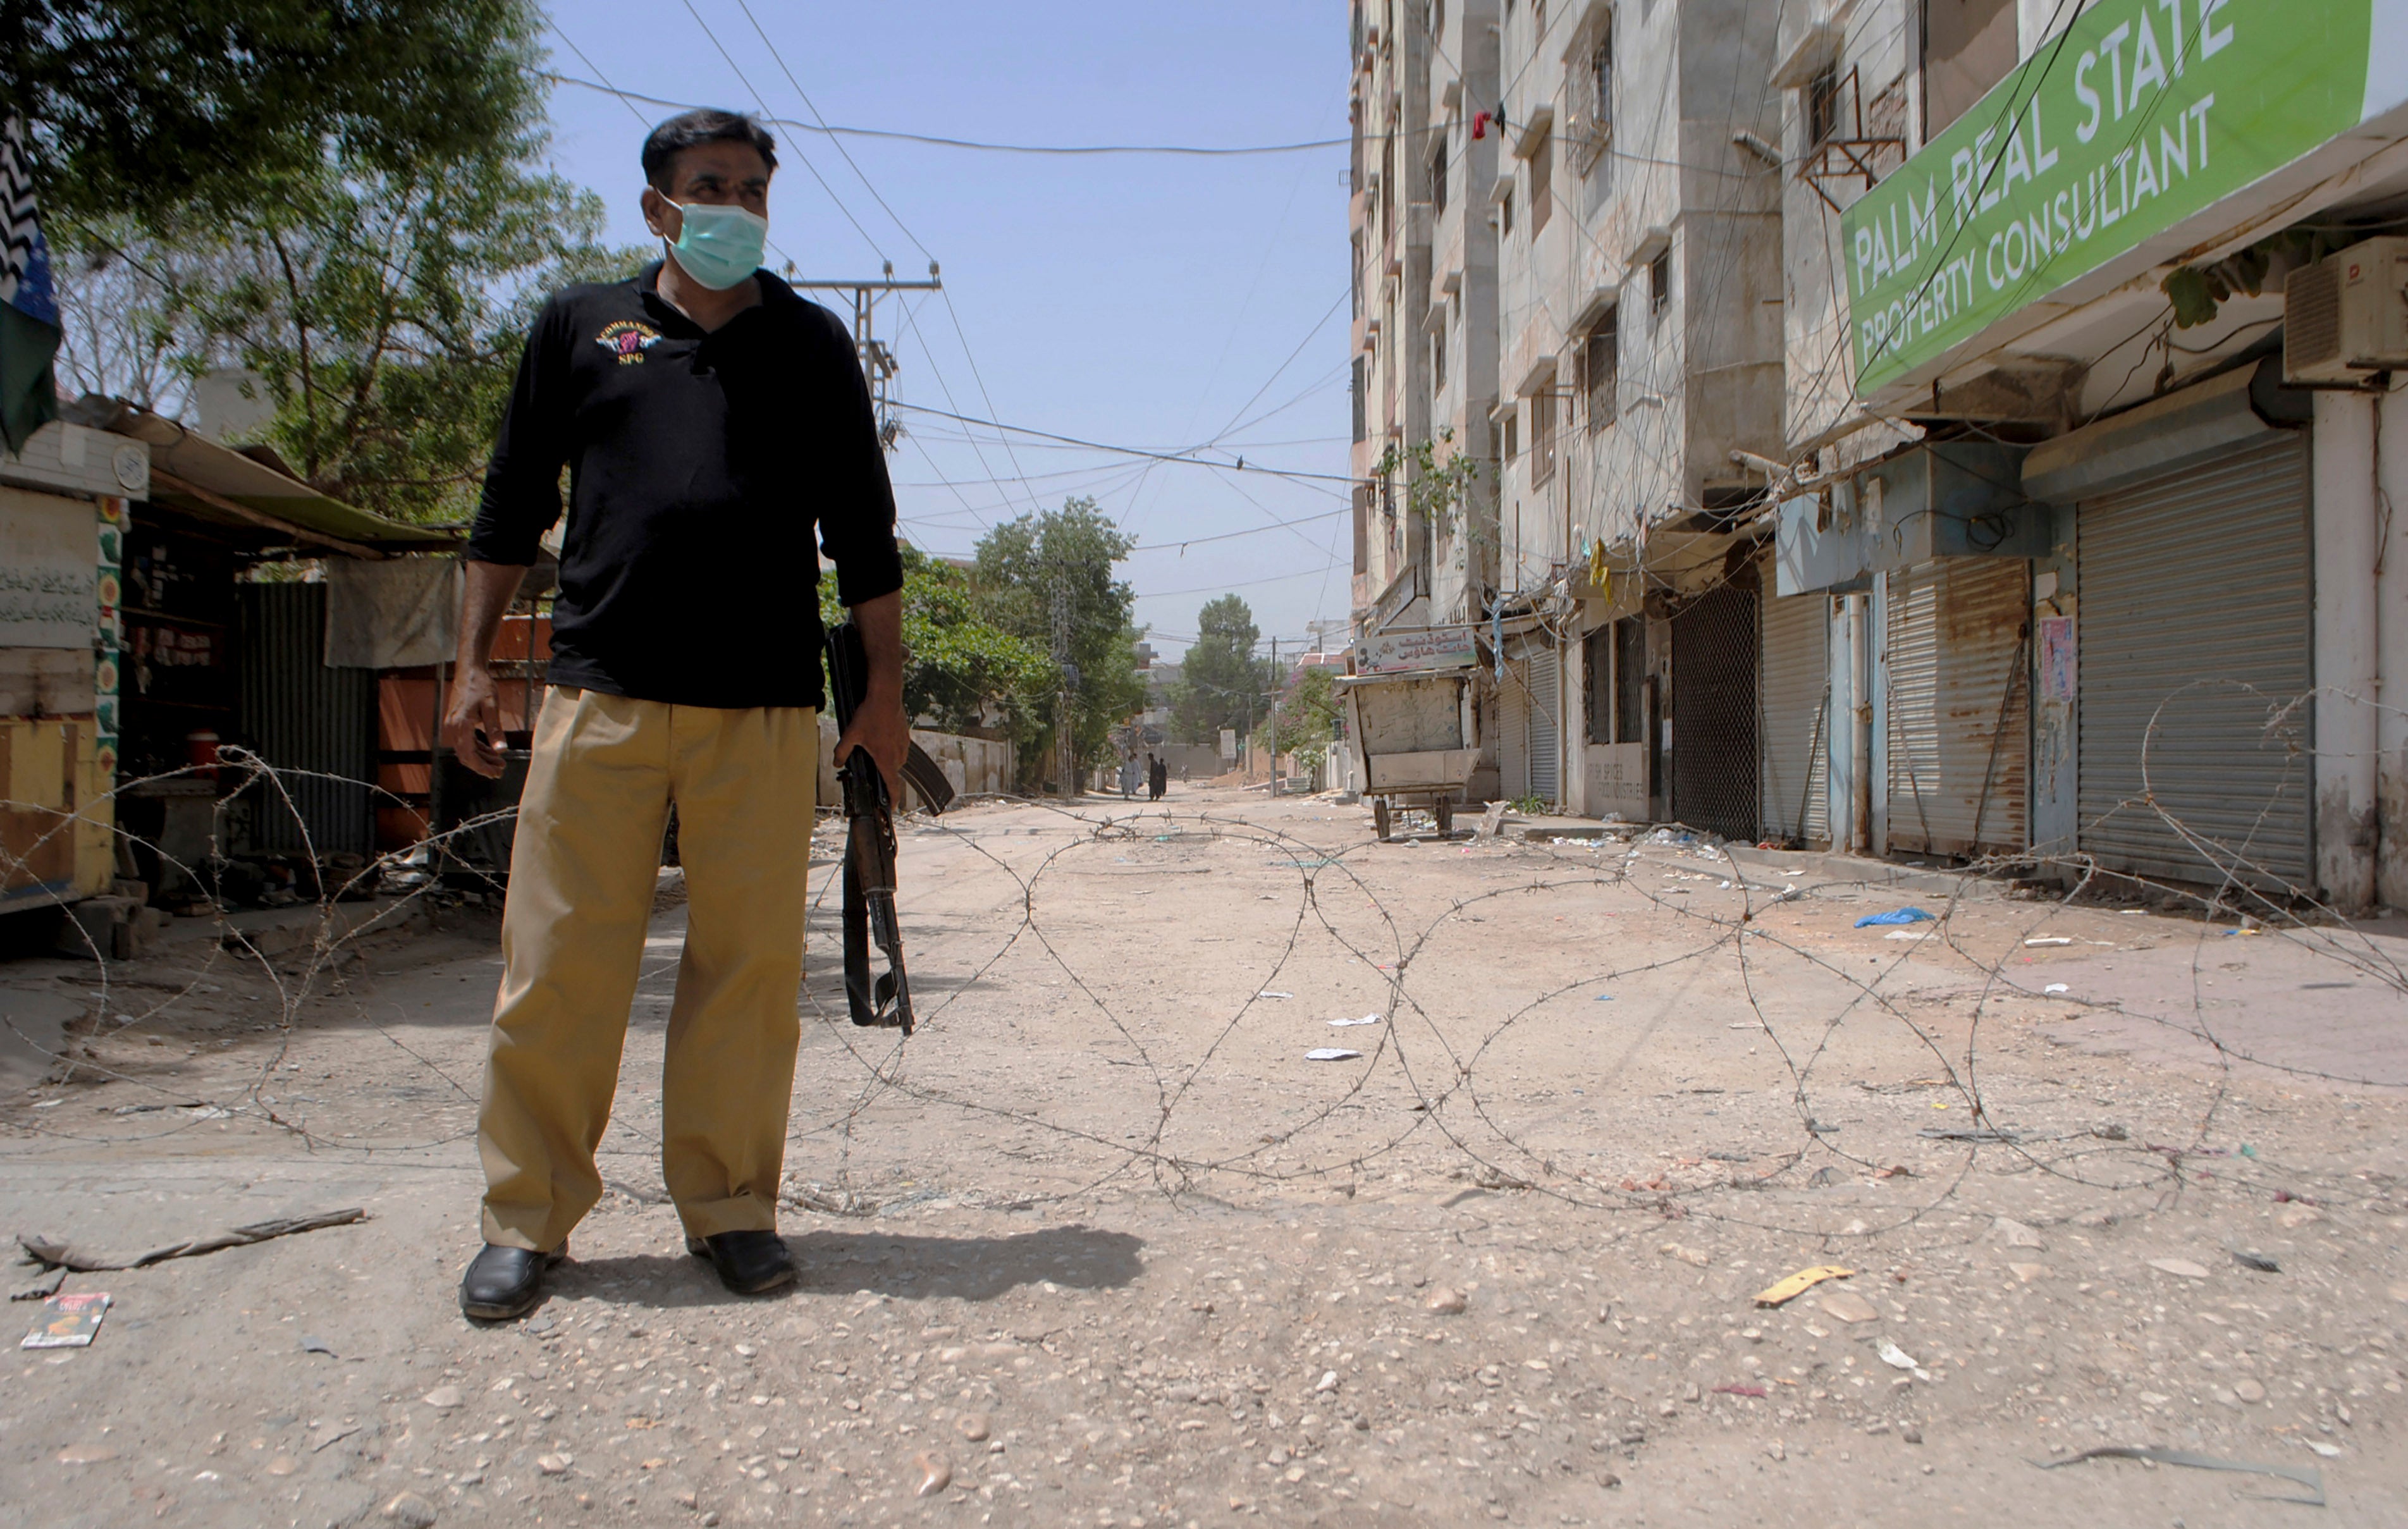 File image: A representative image of a police officer in Pakistan